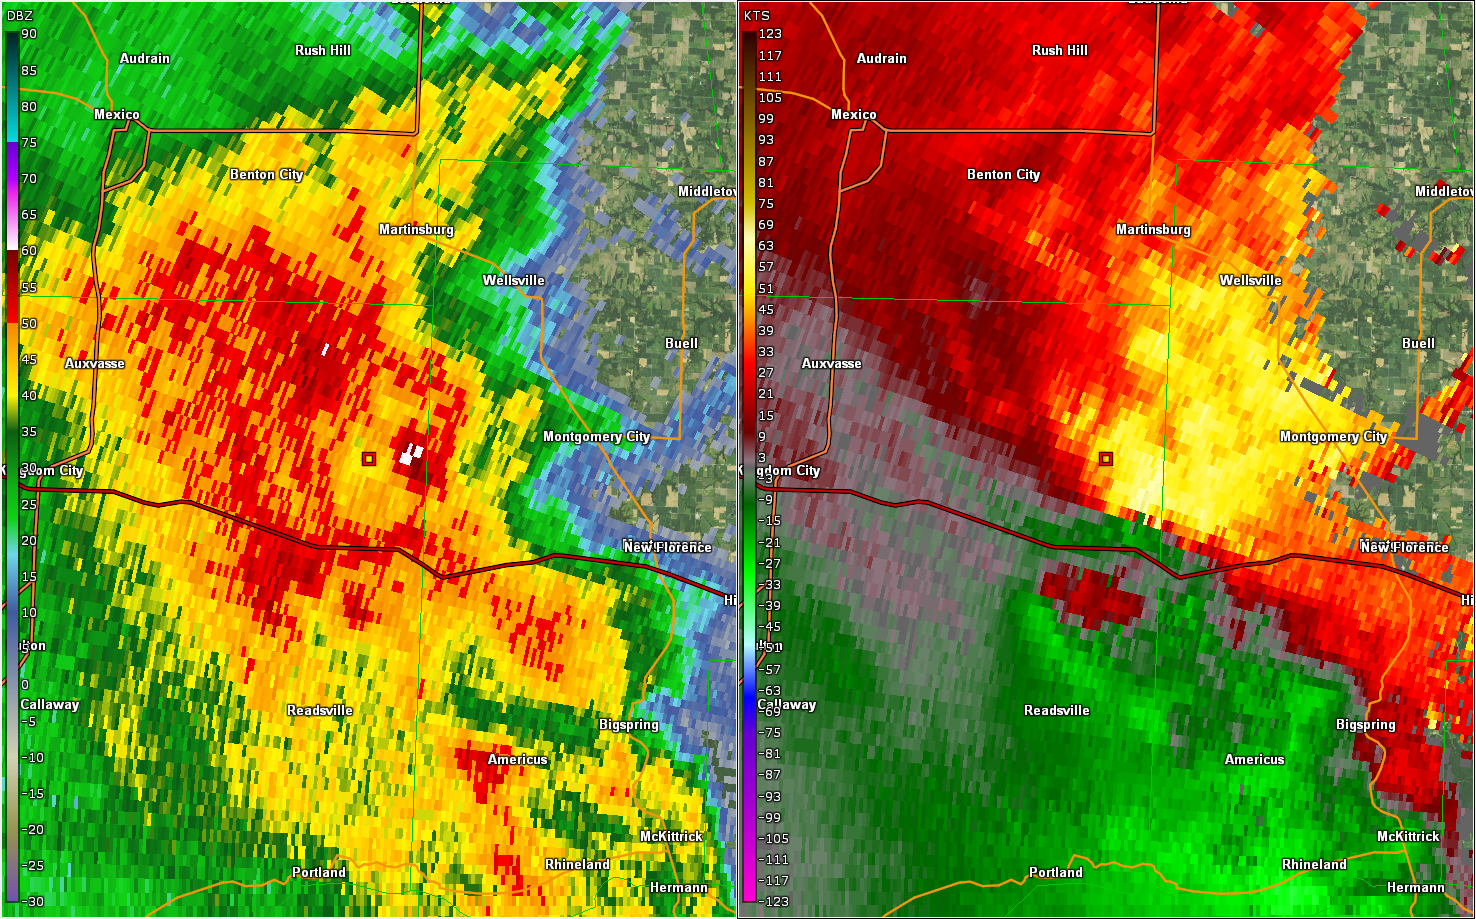 Two panel radar picture of reflectivity and storm relative velocity of the tornado.